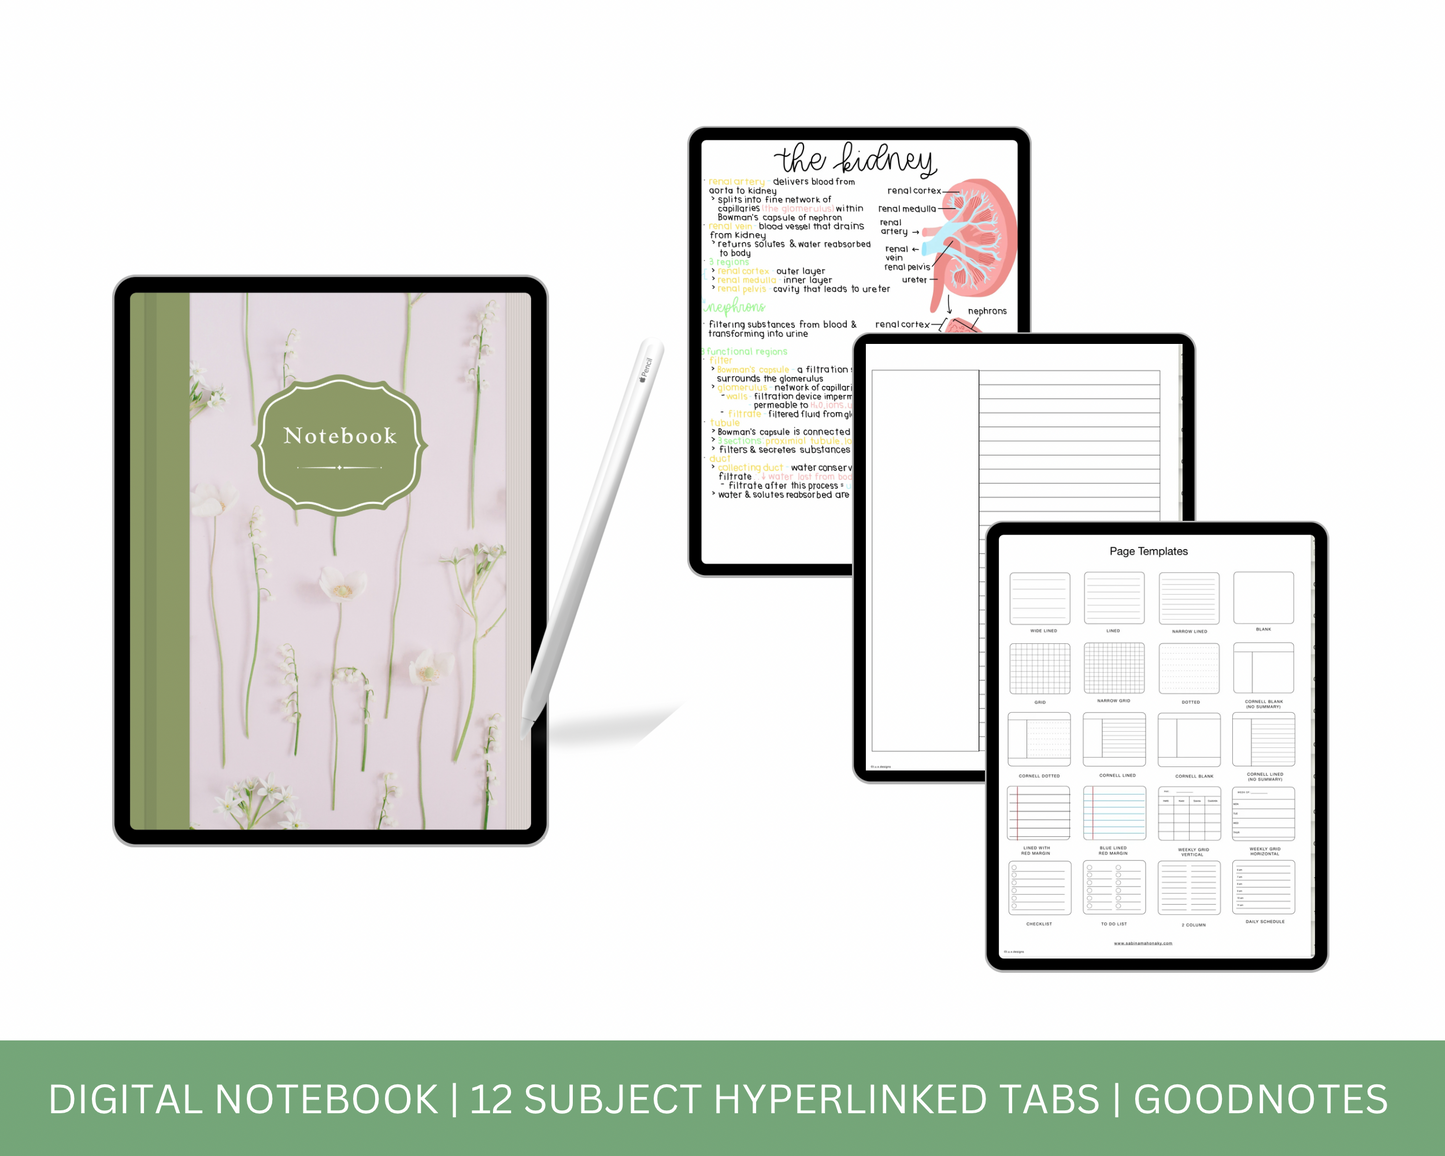 Digital Notebook , 12 Subject Hyperlinked Tabs, Note Page Templates, Notebook Template, GoodNotes